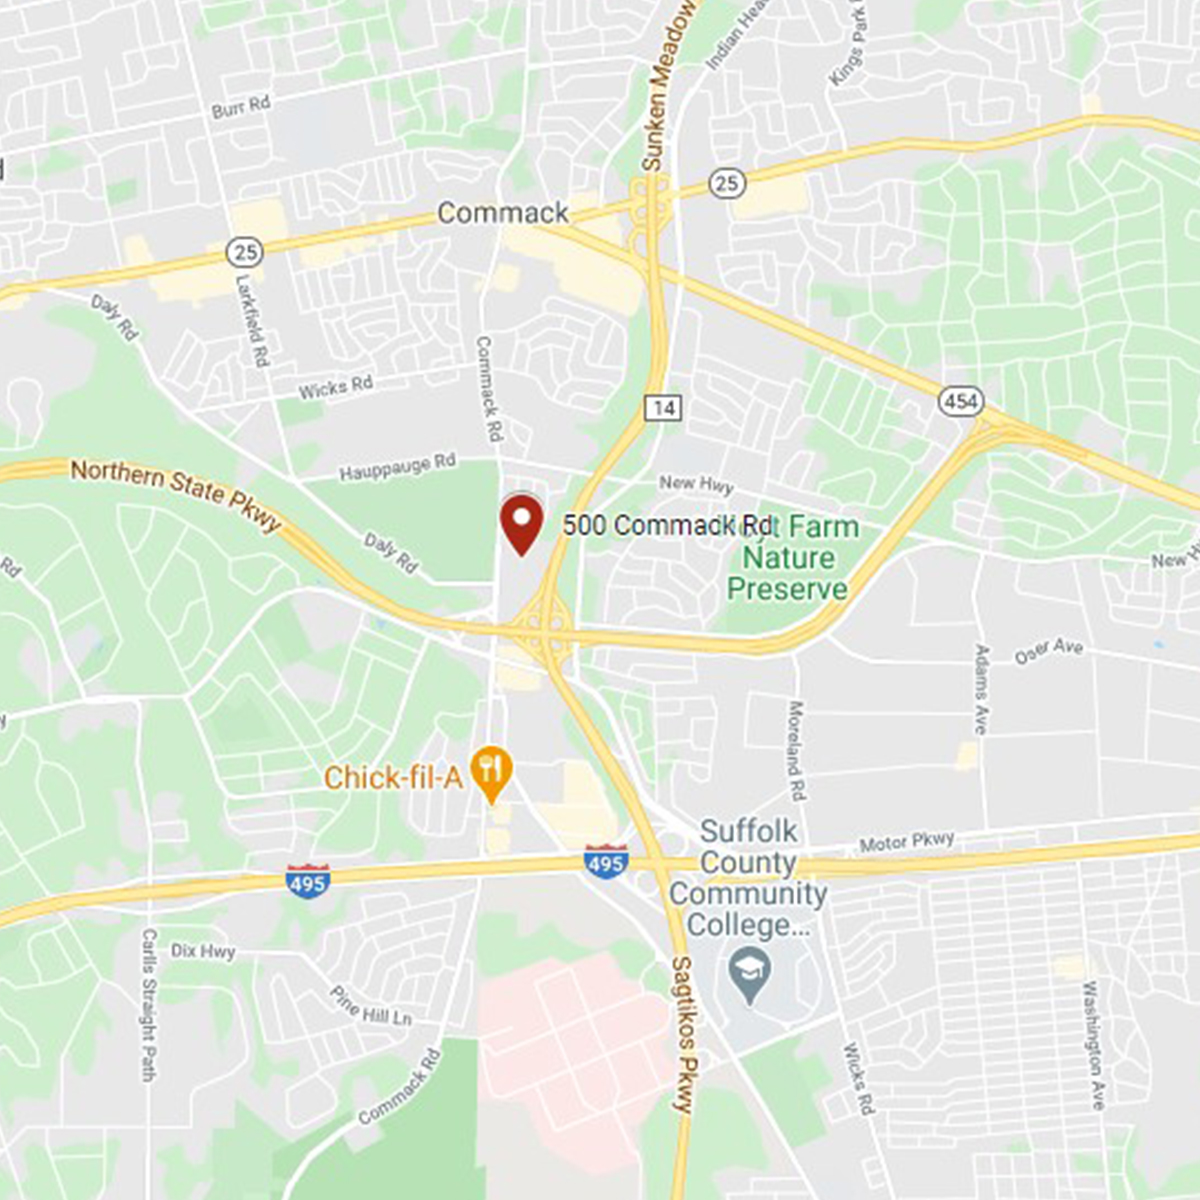 Commack location on a map square